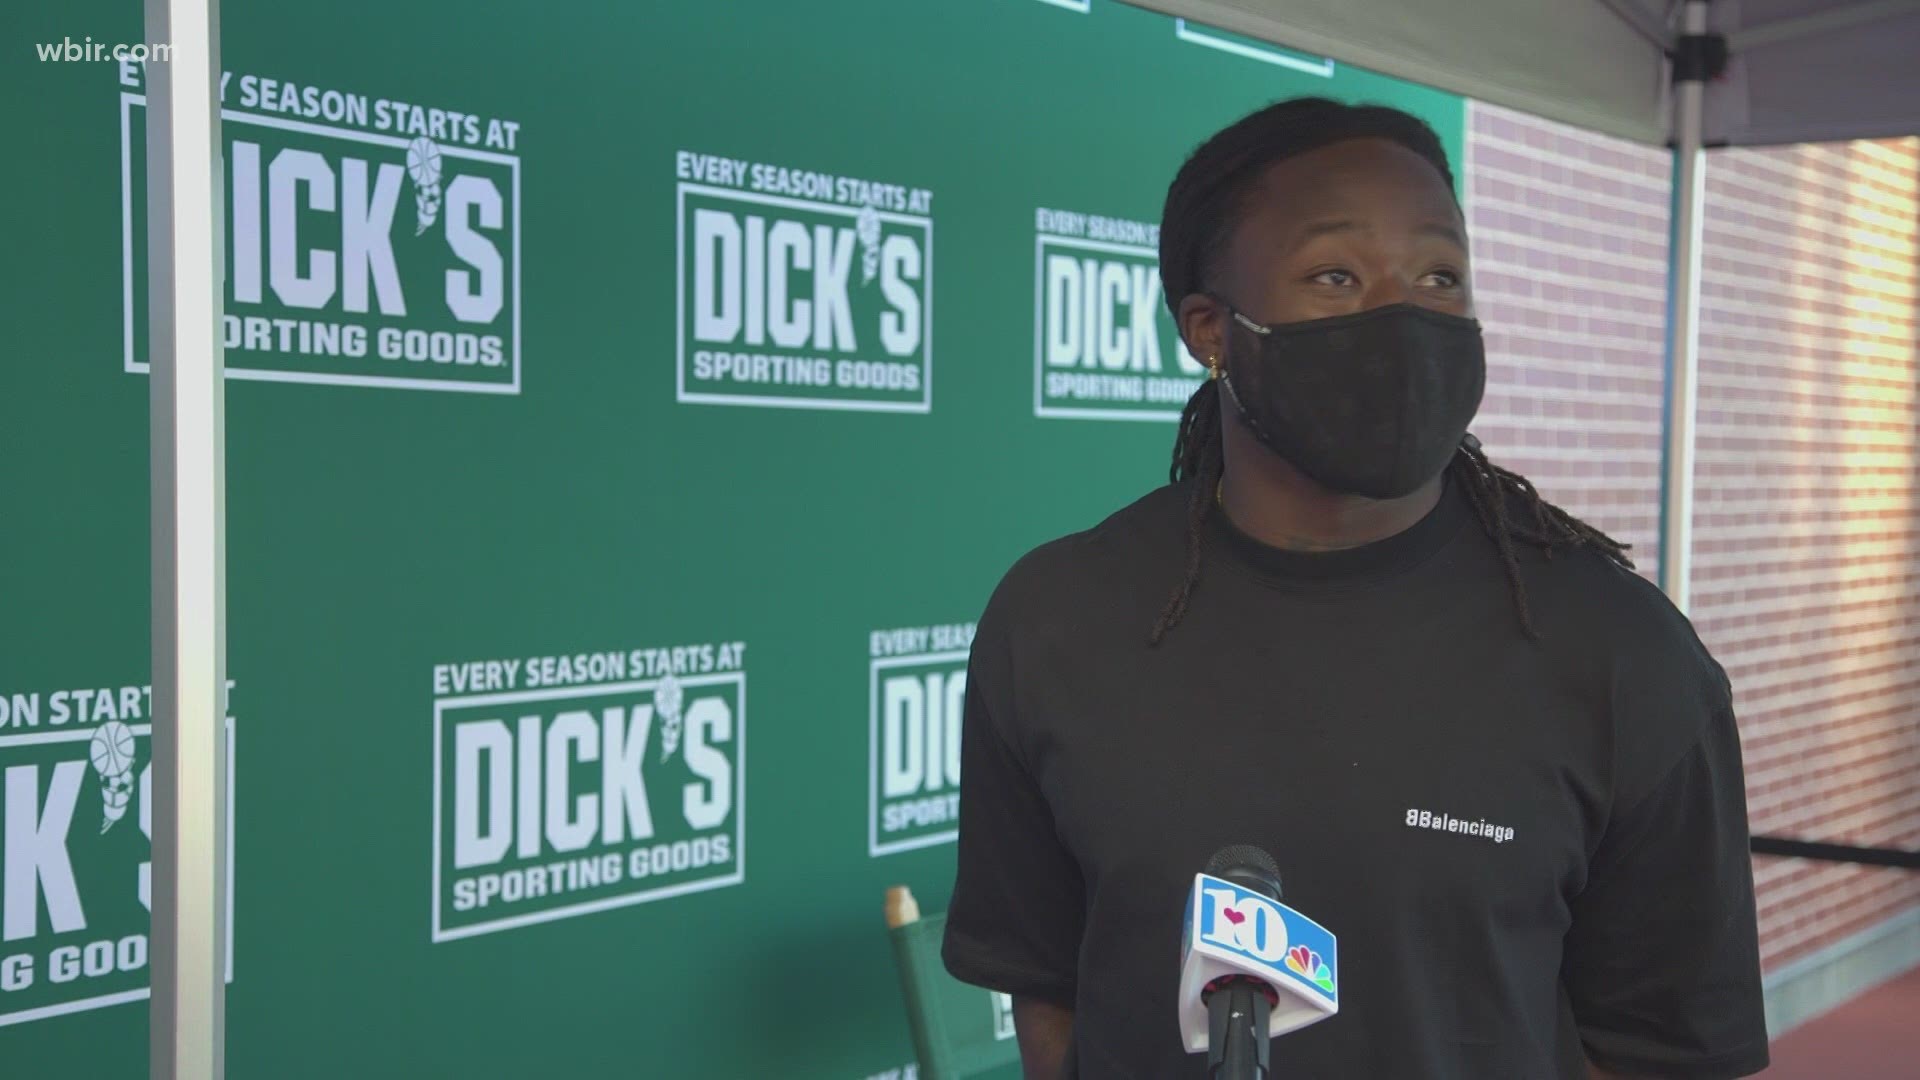 Two VFLs celebrated the grand opening of a Dick's Sporting Goods store at West Town Mall on Saturday.